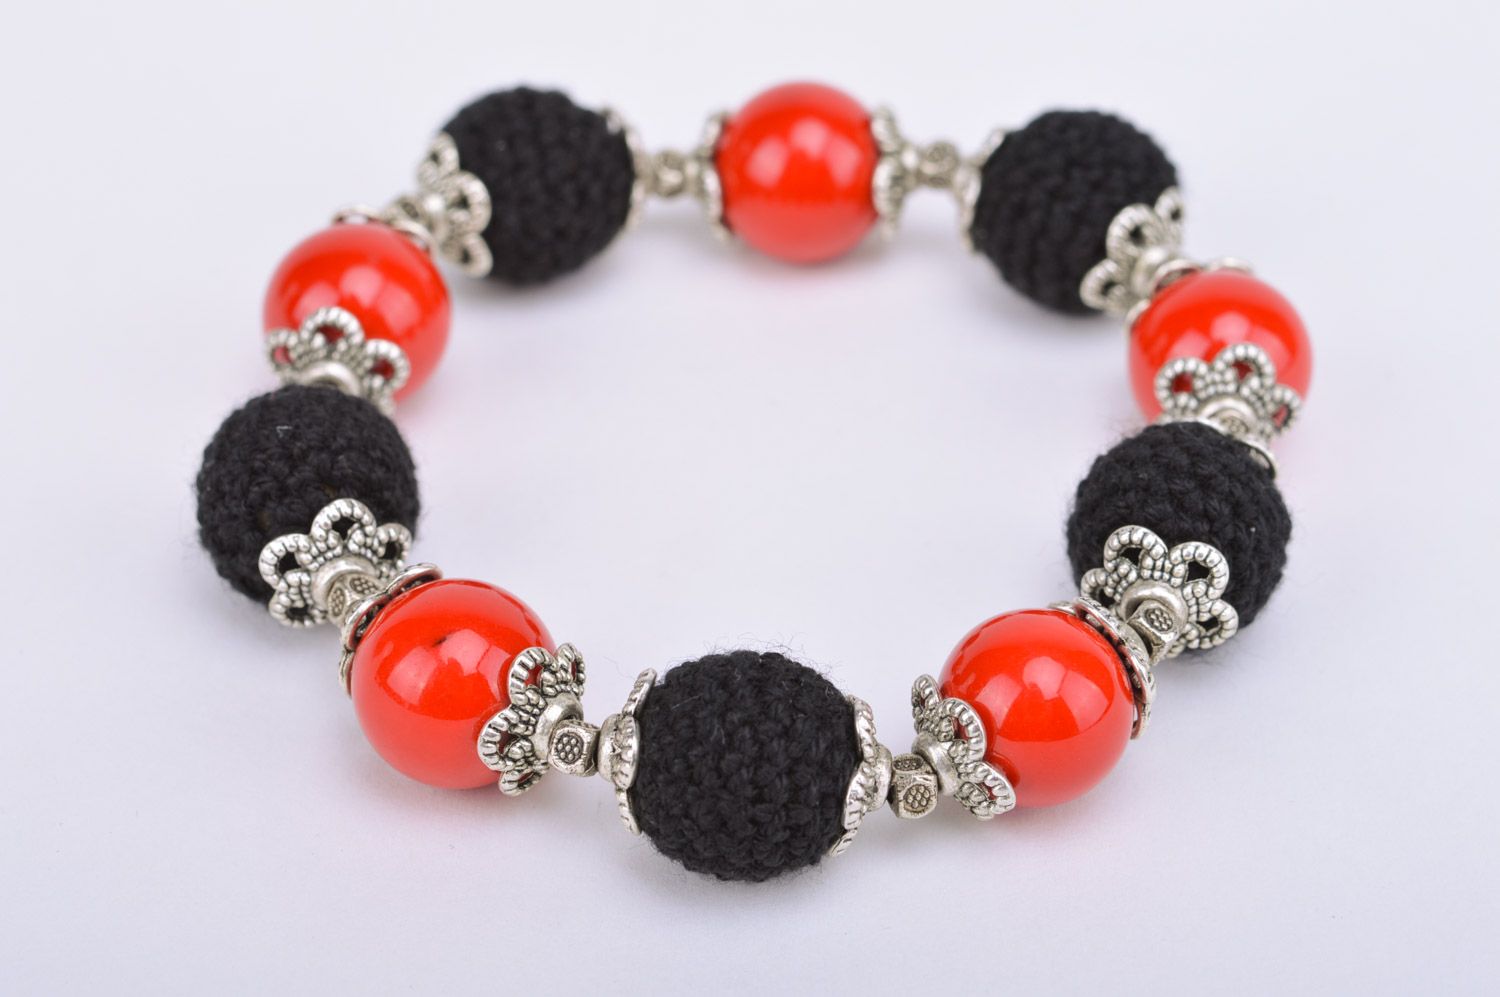 Handmade red and black wrist bracelet with beads crocheted over with threads Passion photo 5